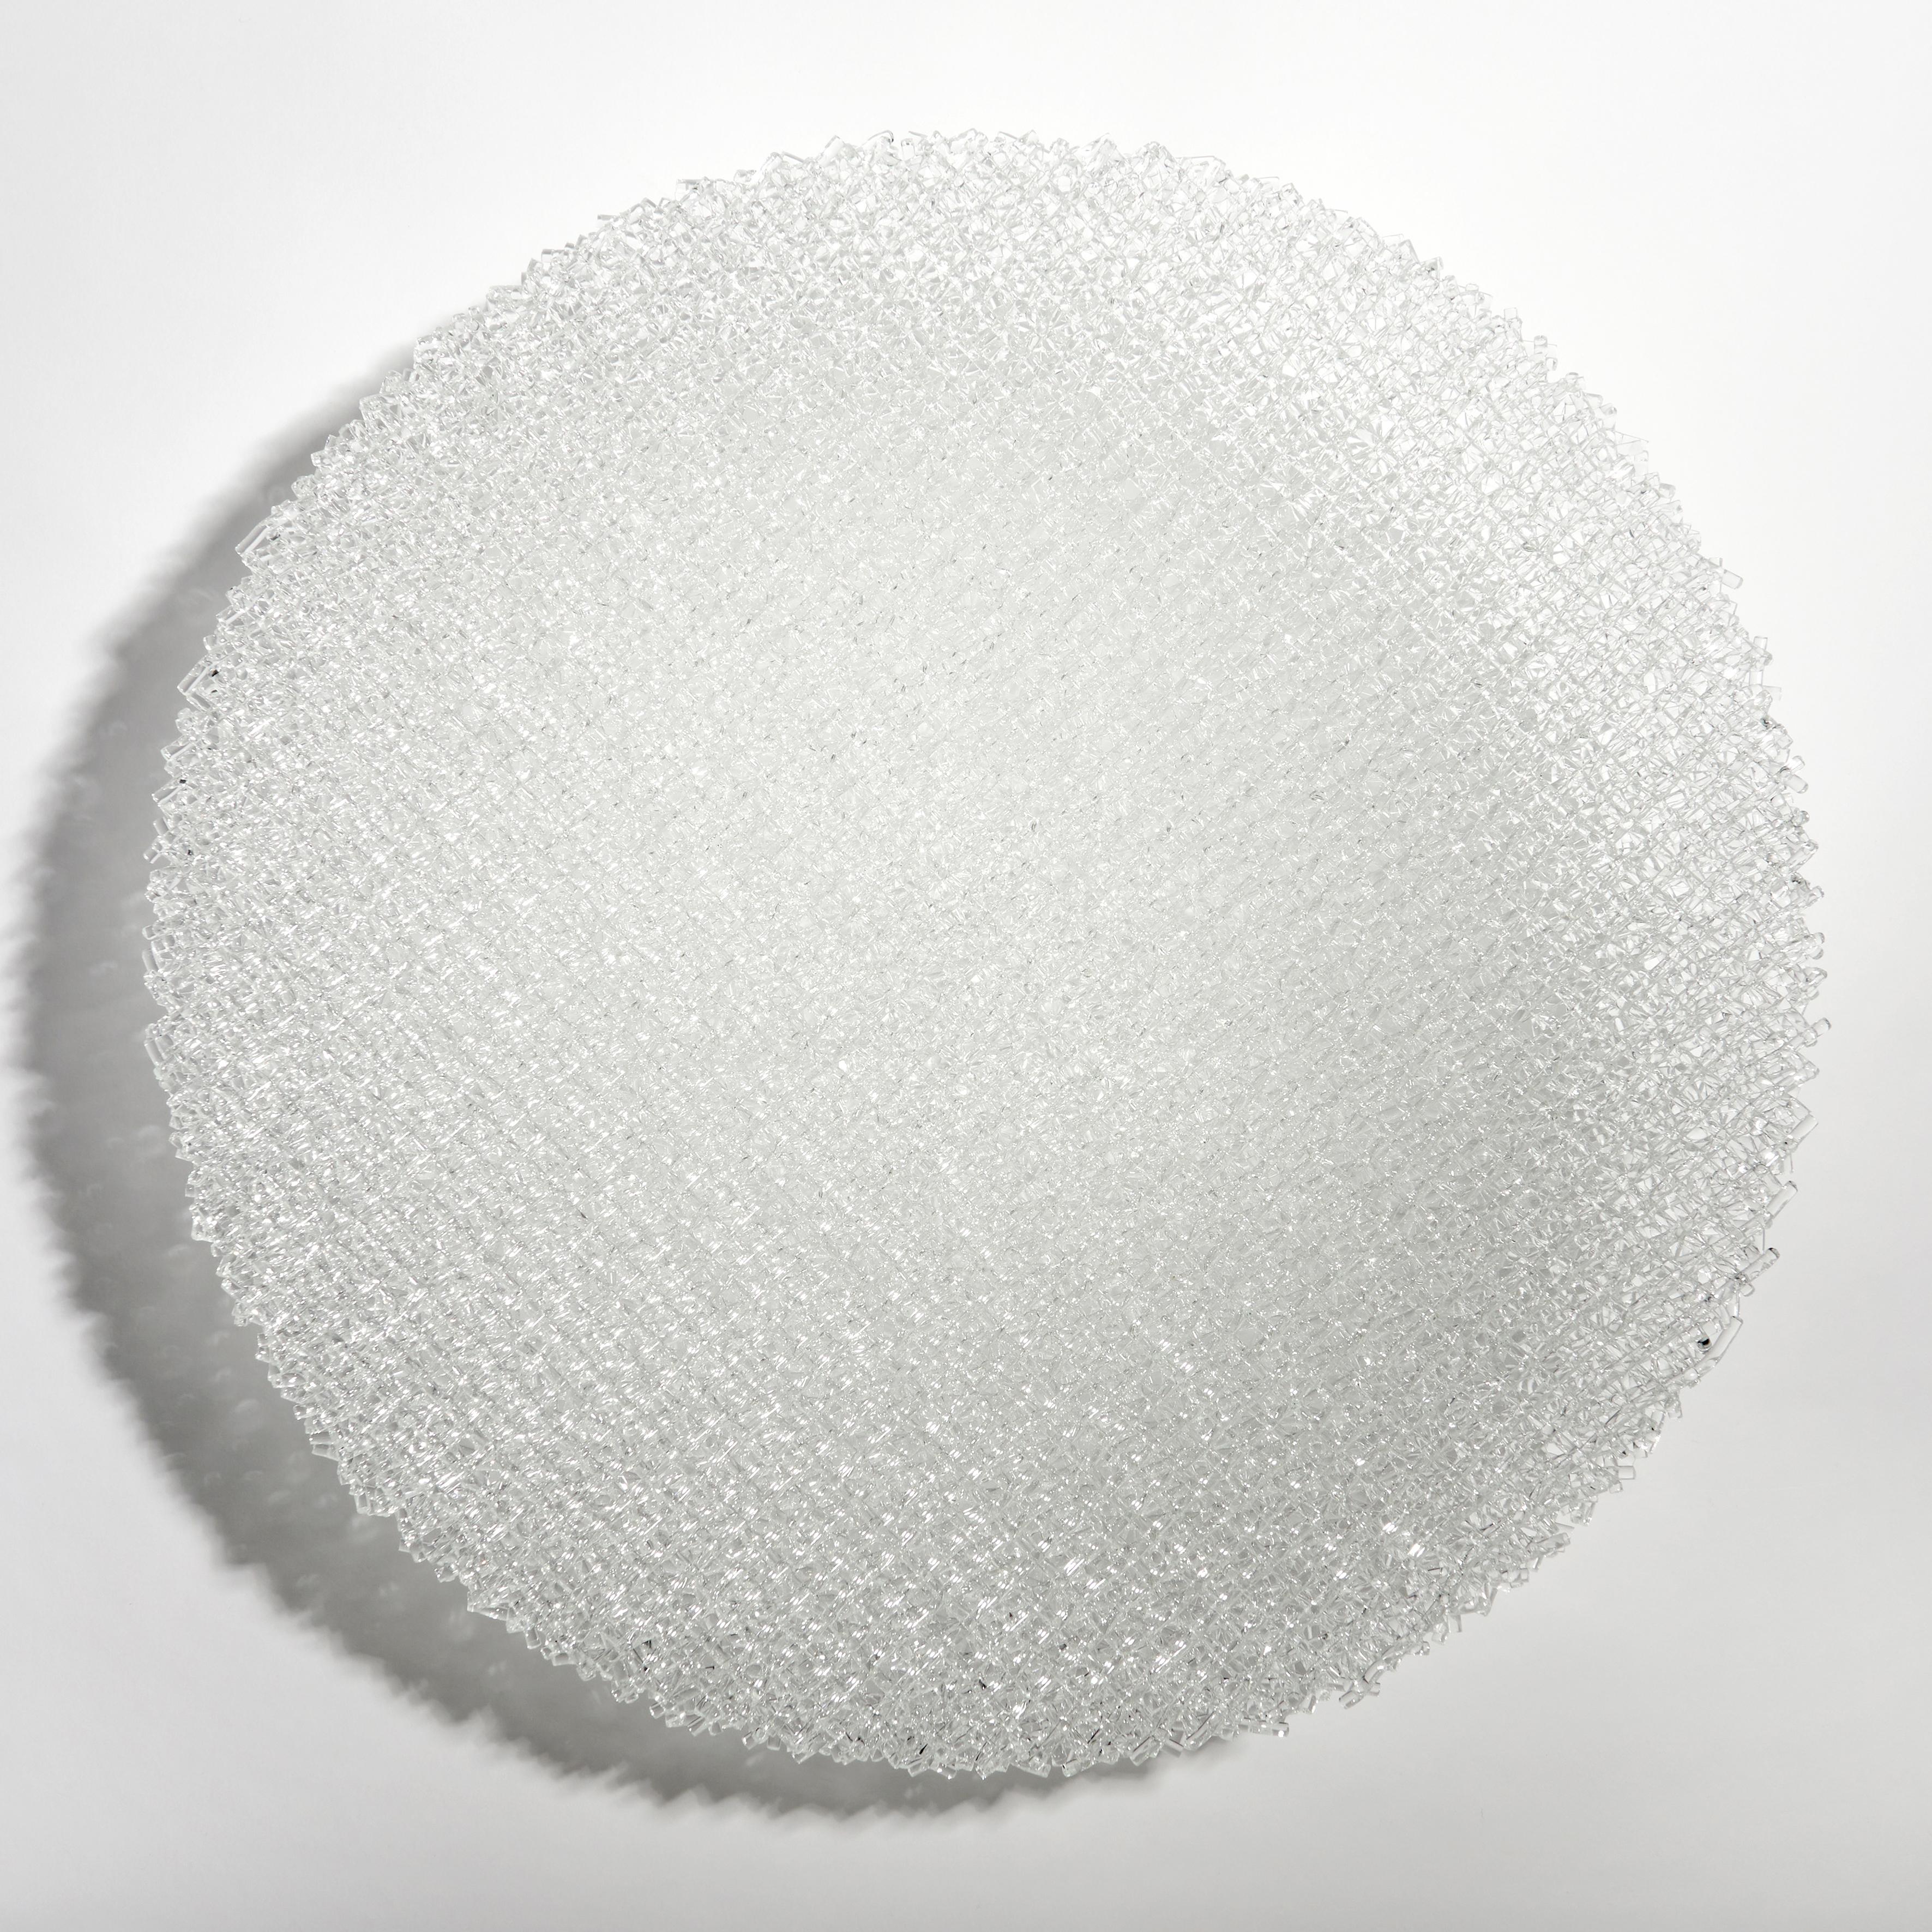 Organic Modern Soft Rime, a Unique Woven Clear Glass Sculptural Centrepiece by Cathryn Shilling